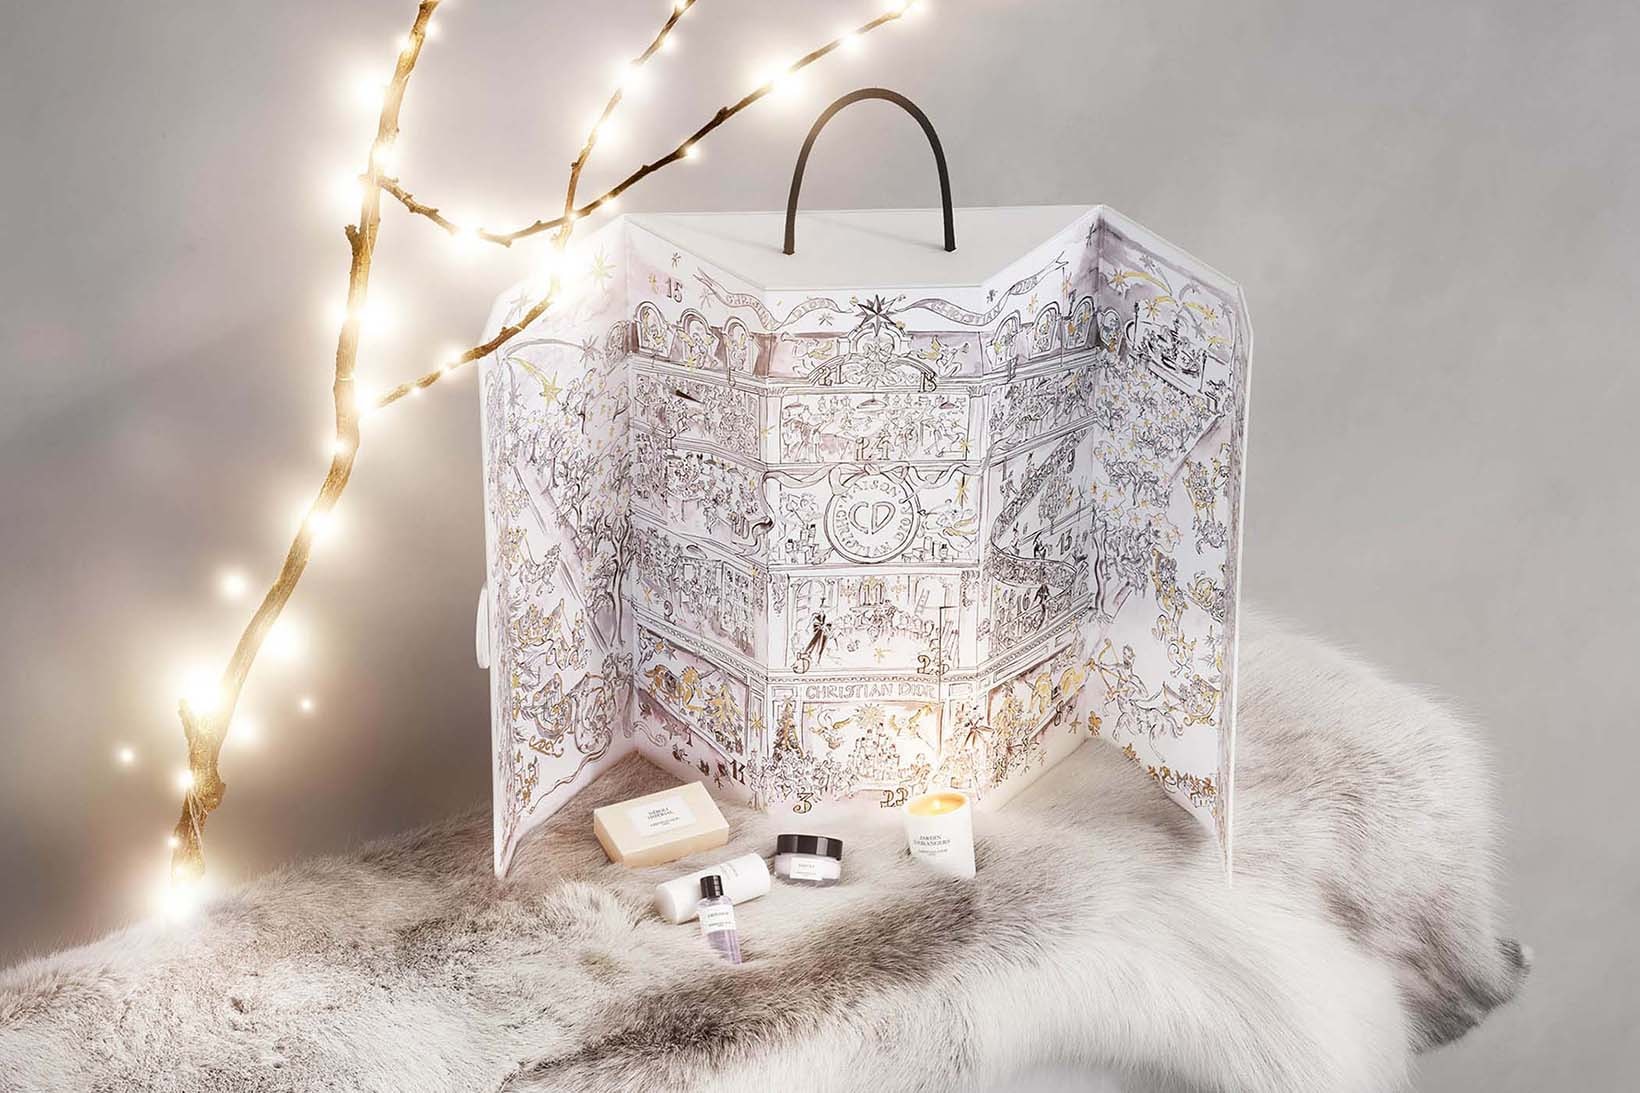 Dior's beauty advent calendar is the most spectacular of them all